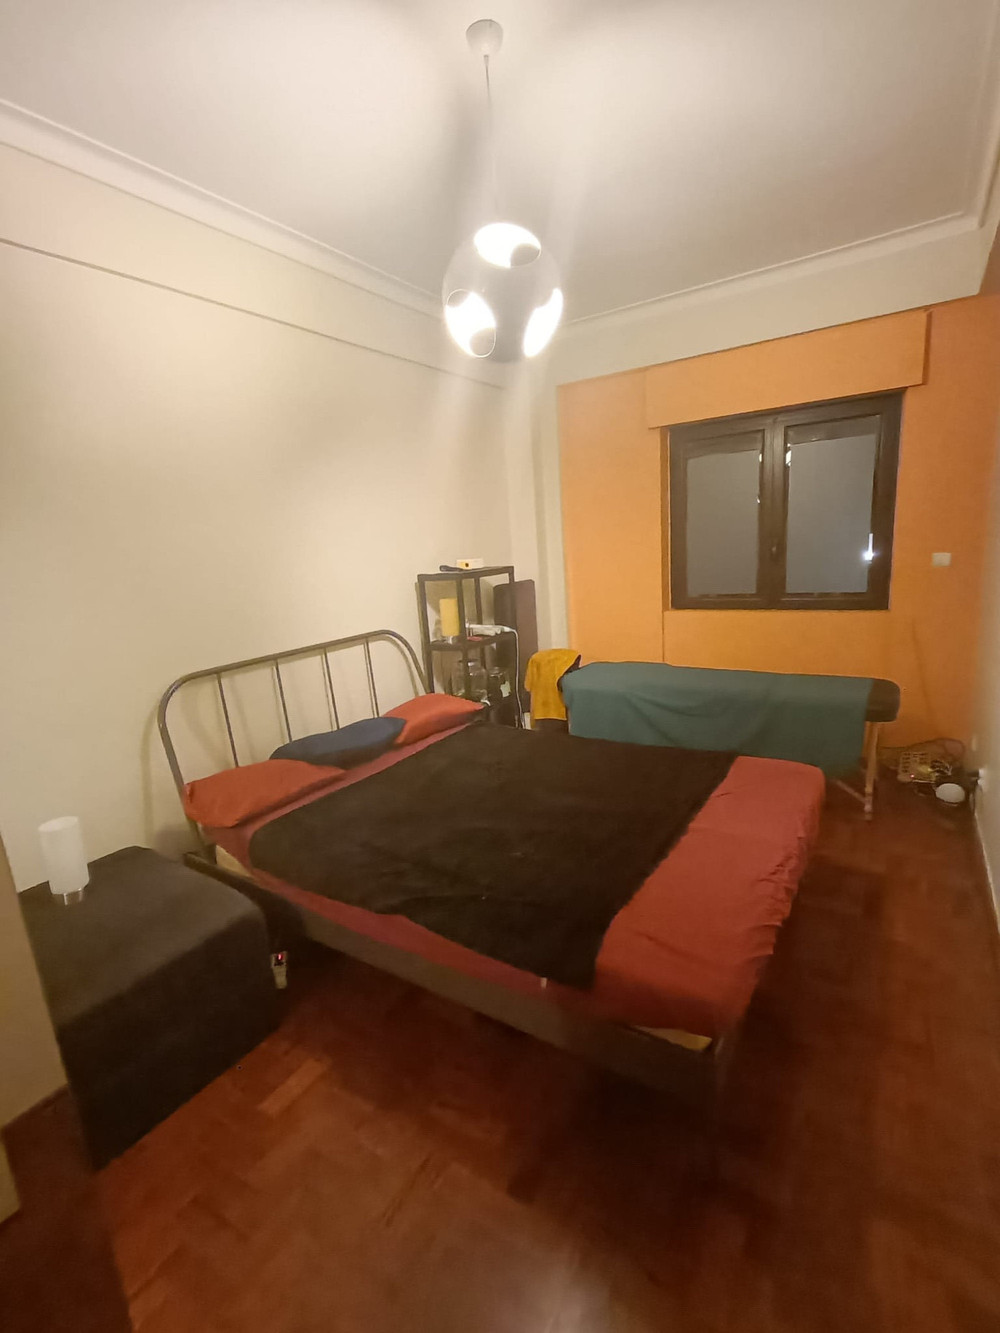 Double bed room for one person only in the center preview